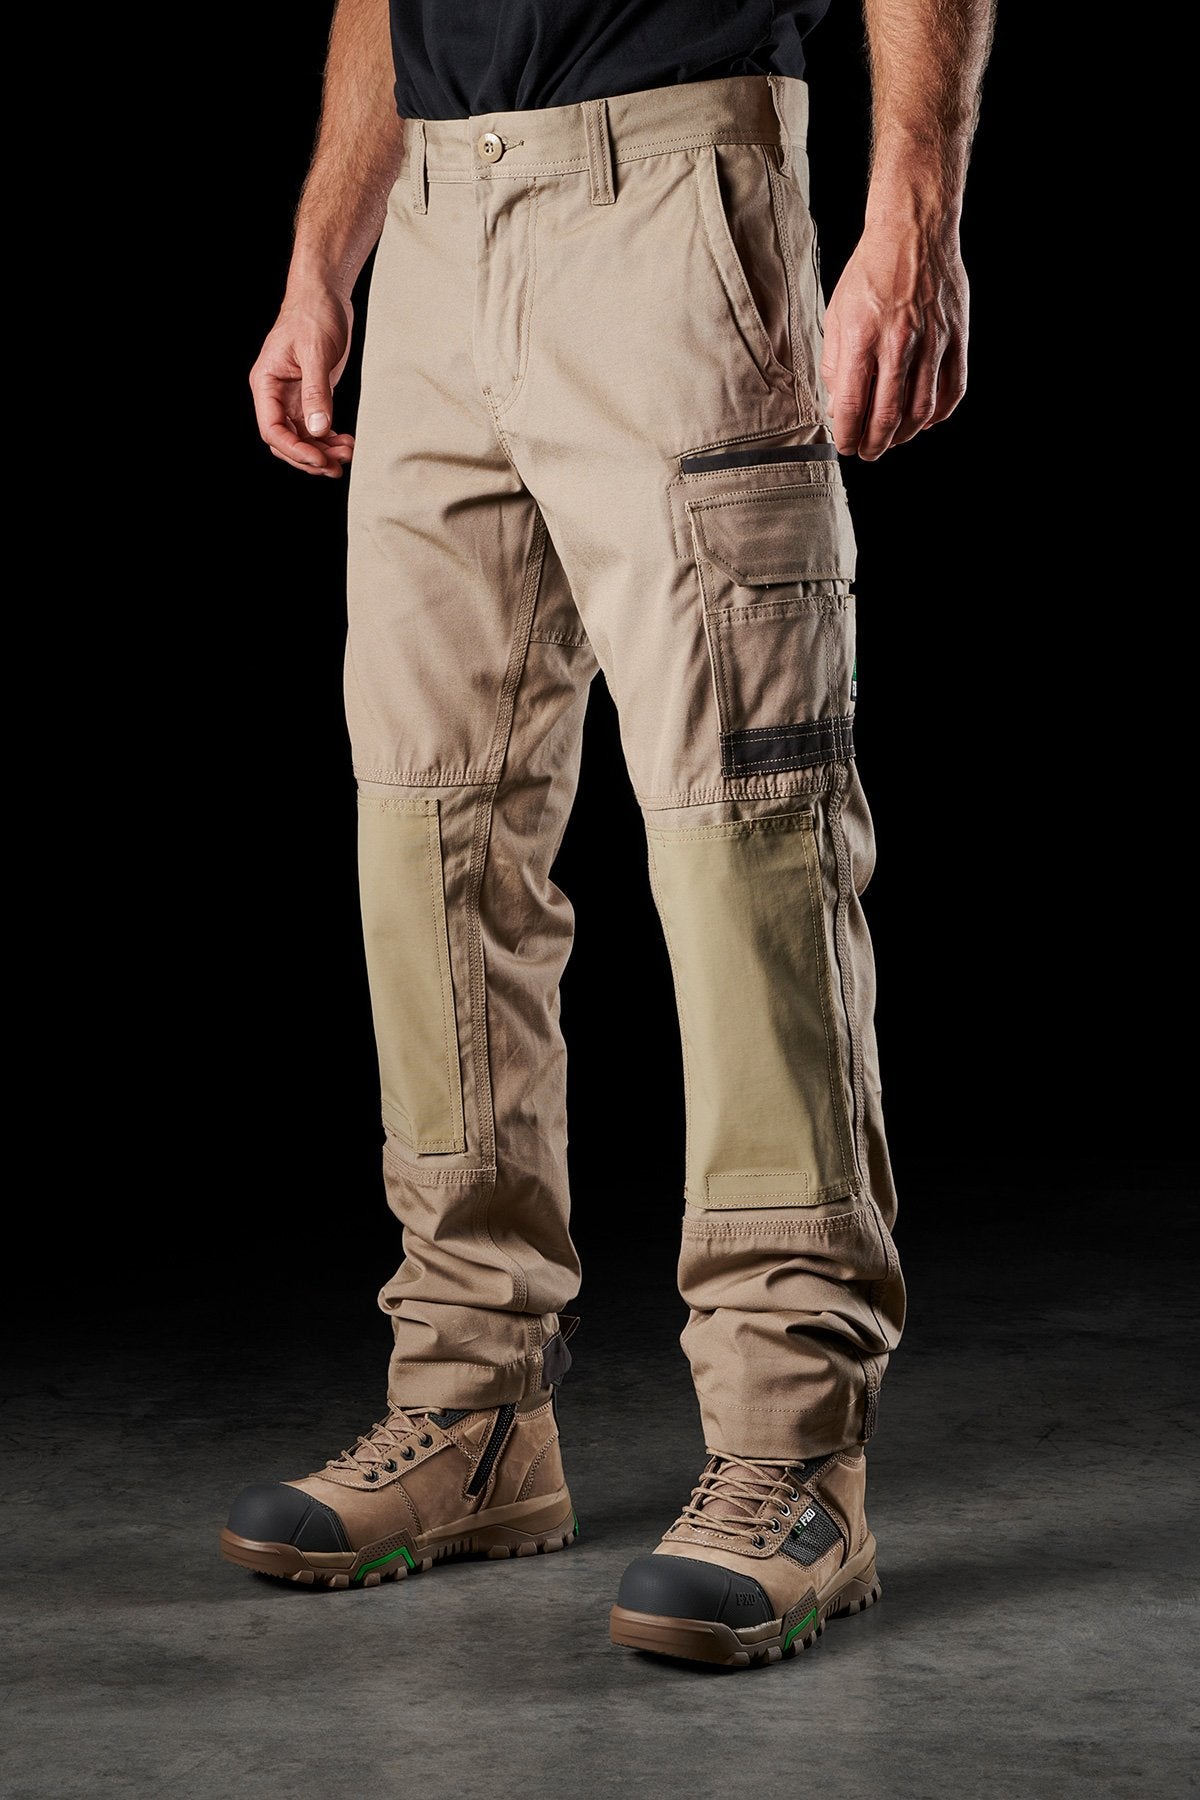 Mens Site King Multi Pocket Cargo Work Trousers with an